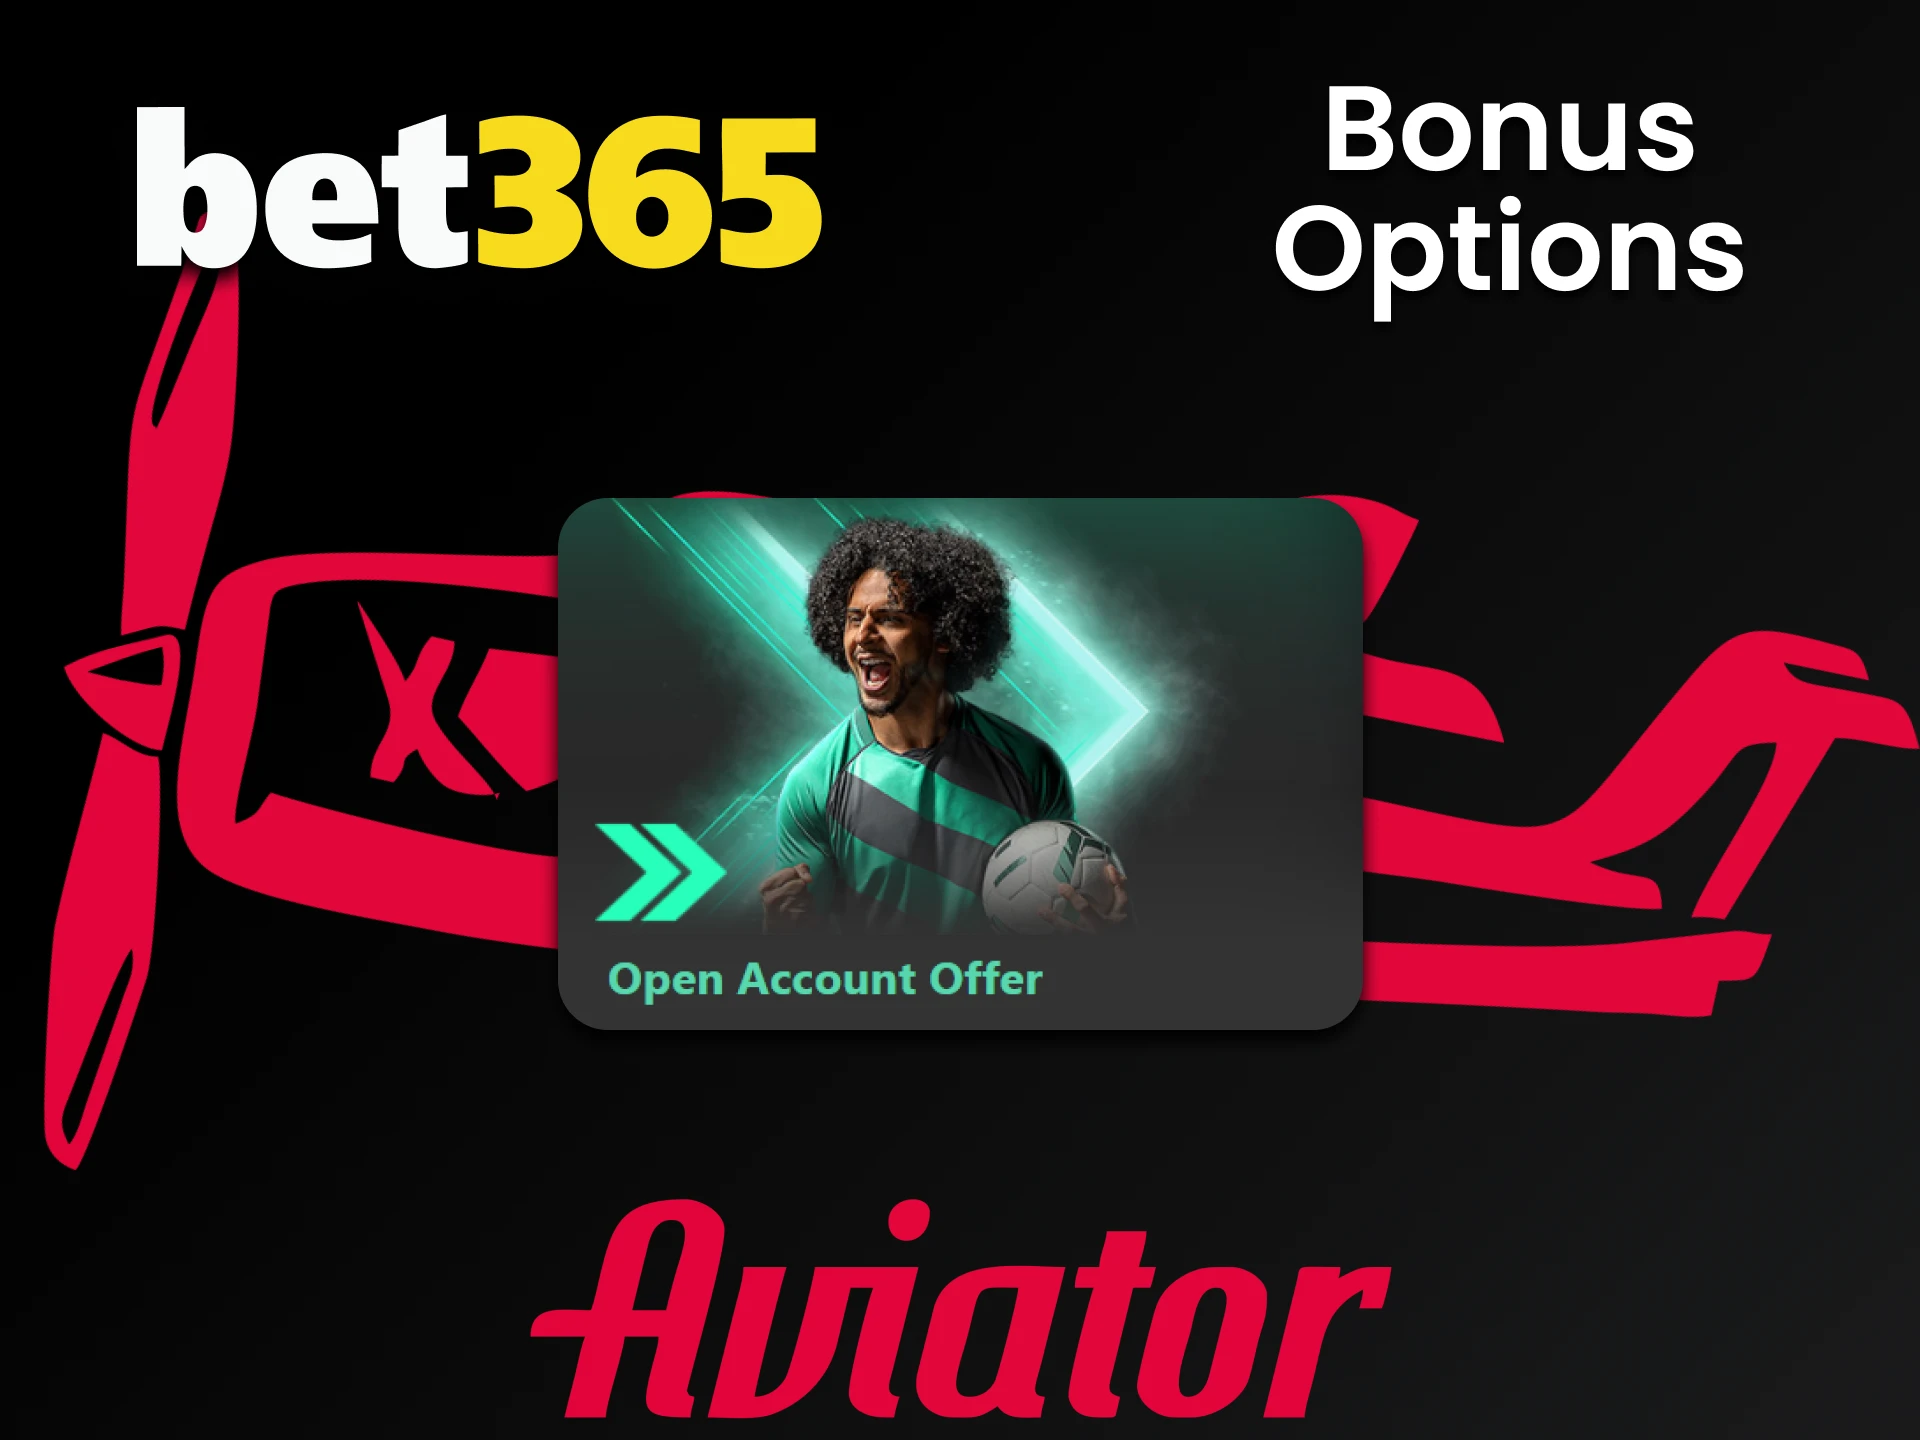 Get bonuses for playing Aviator from Bet365.